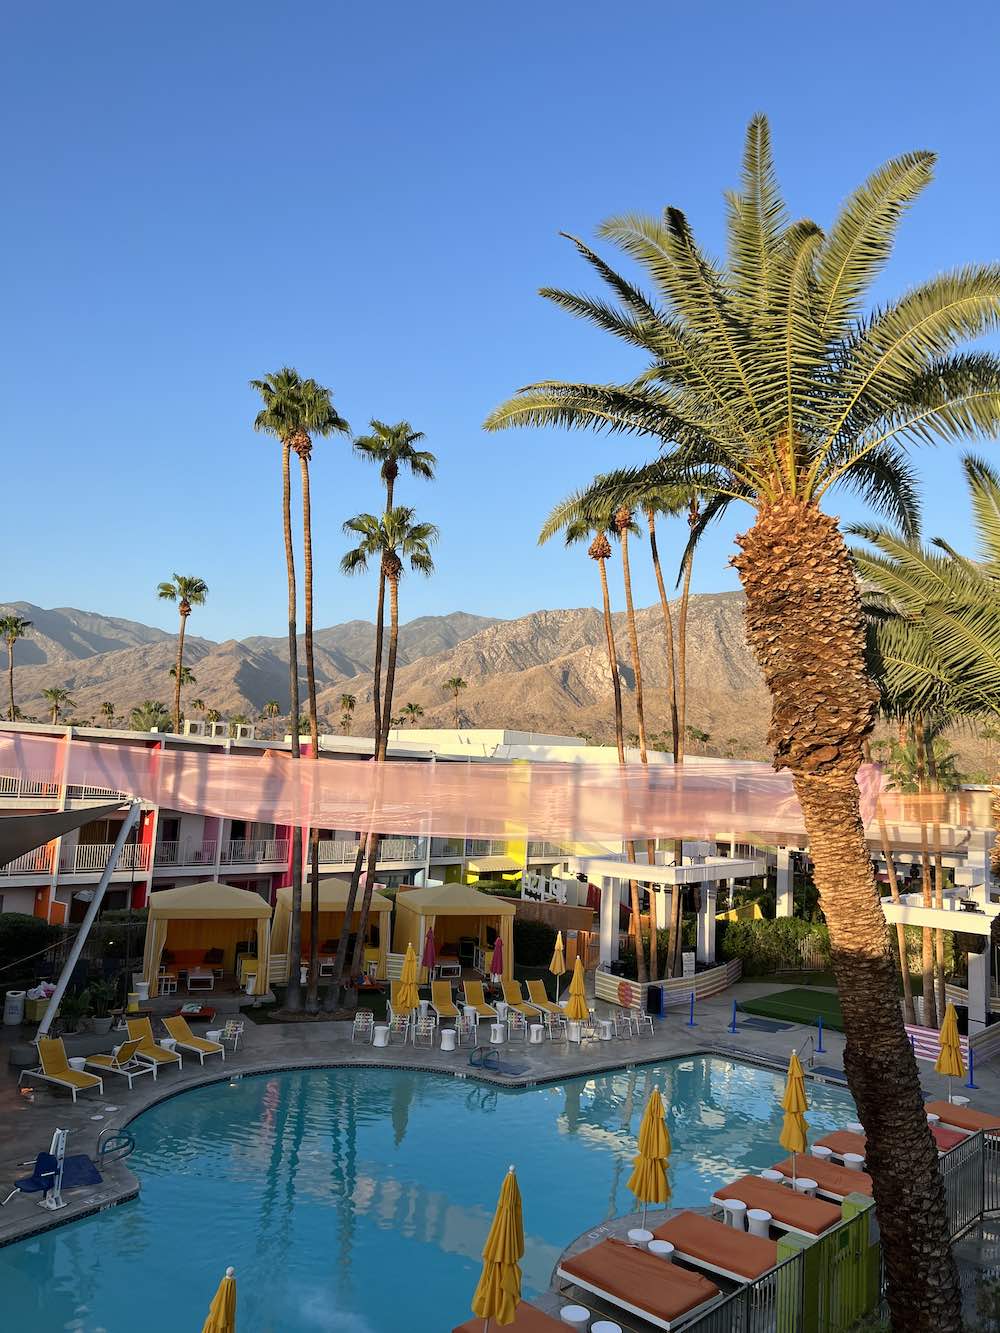 How To Spend 3 Days in Palm Springs - Saguaro Hotel